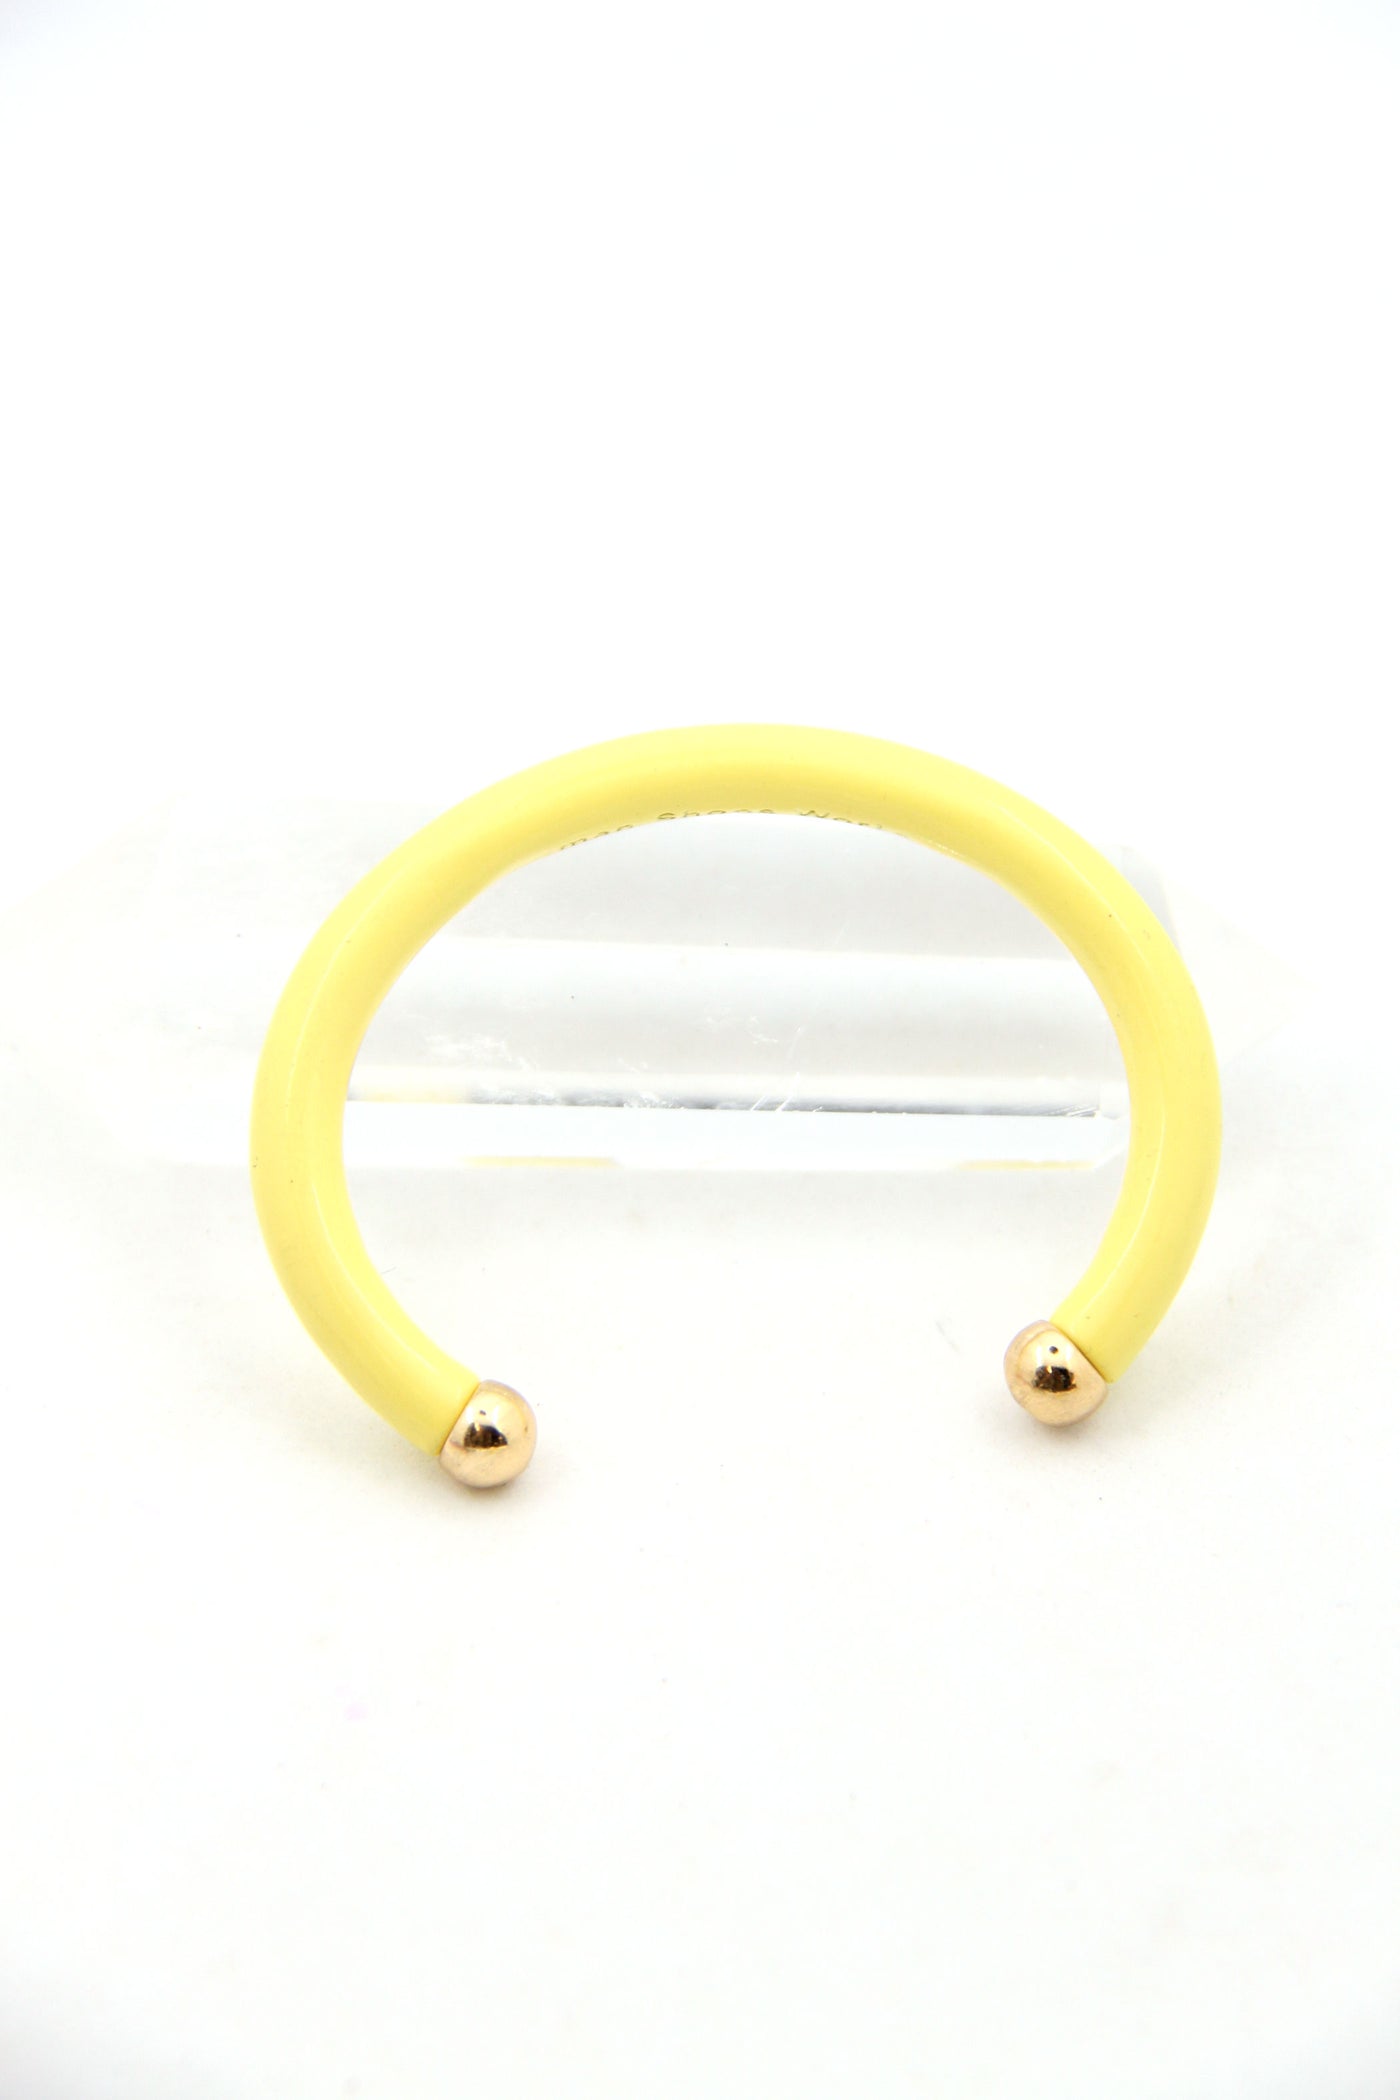 Butter Yellow Luxe Enamel Cuff Bracelet with Golden Ball Ends, Colorful Arm Stack, 1 Bangle